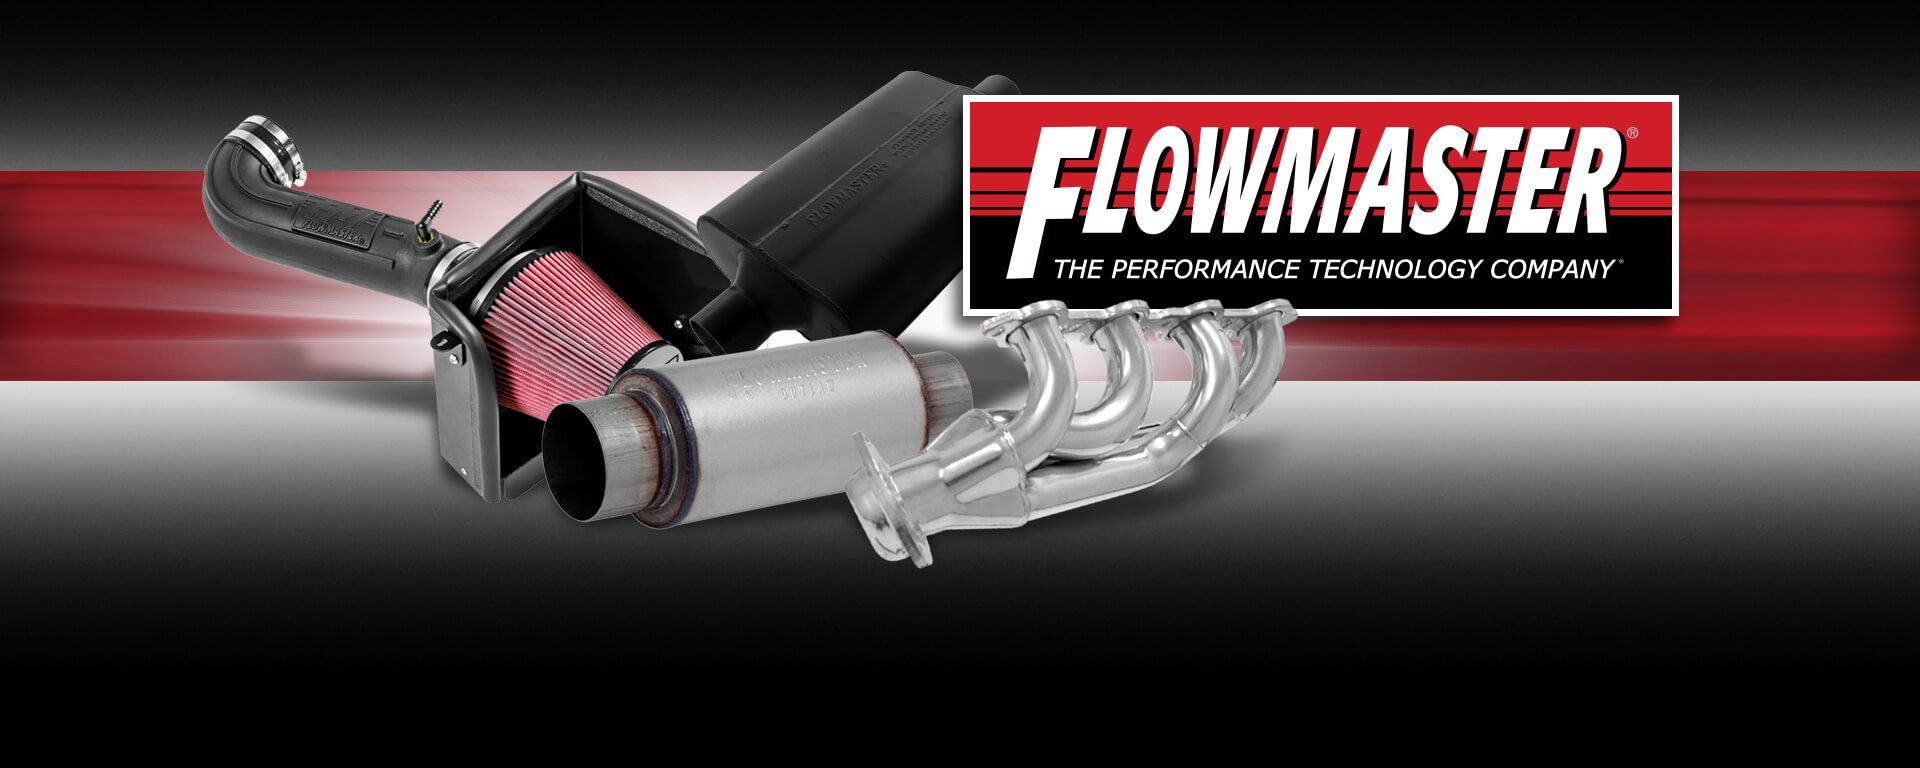 A flowmaster logo is on a black and red background